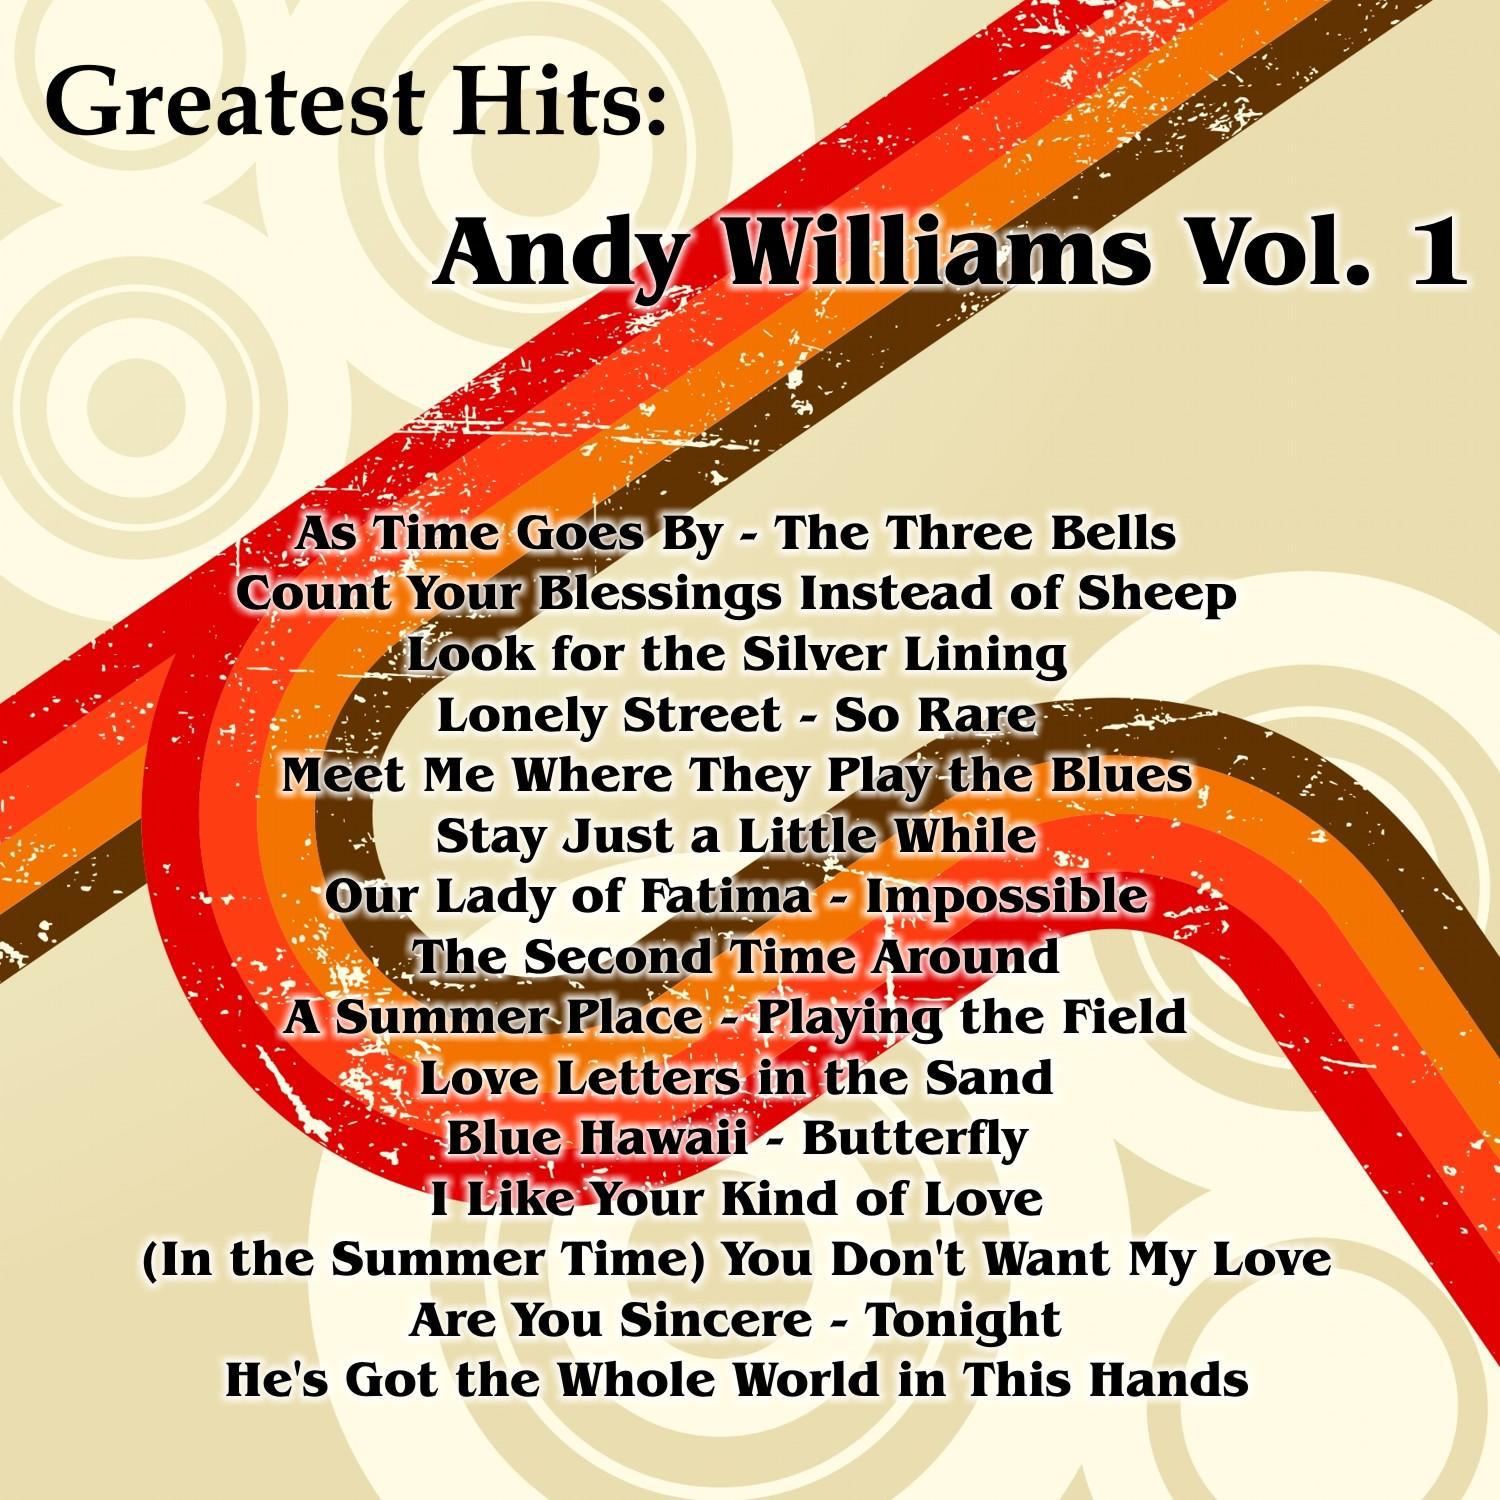 Greatest Hits: Andy Williams Vol. 1